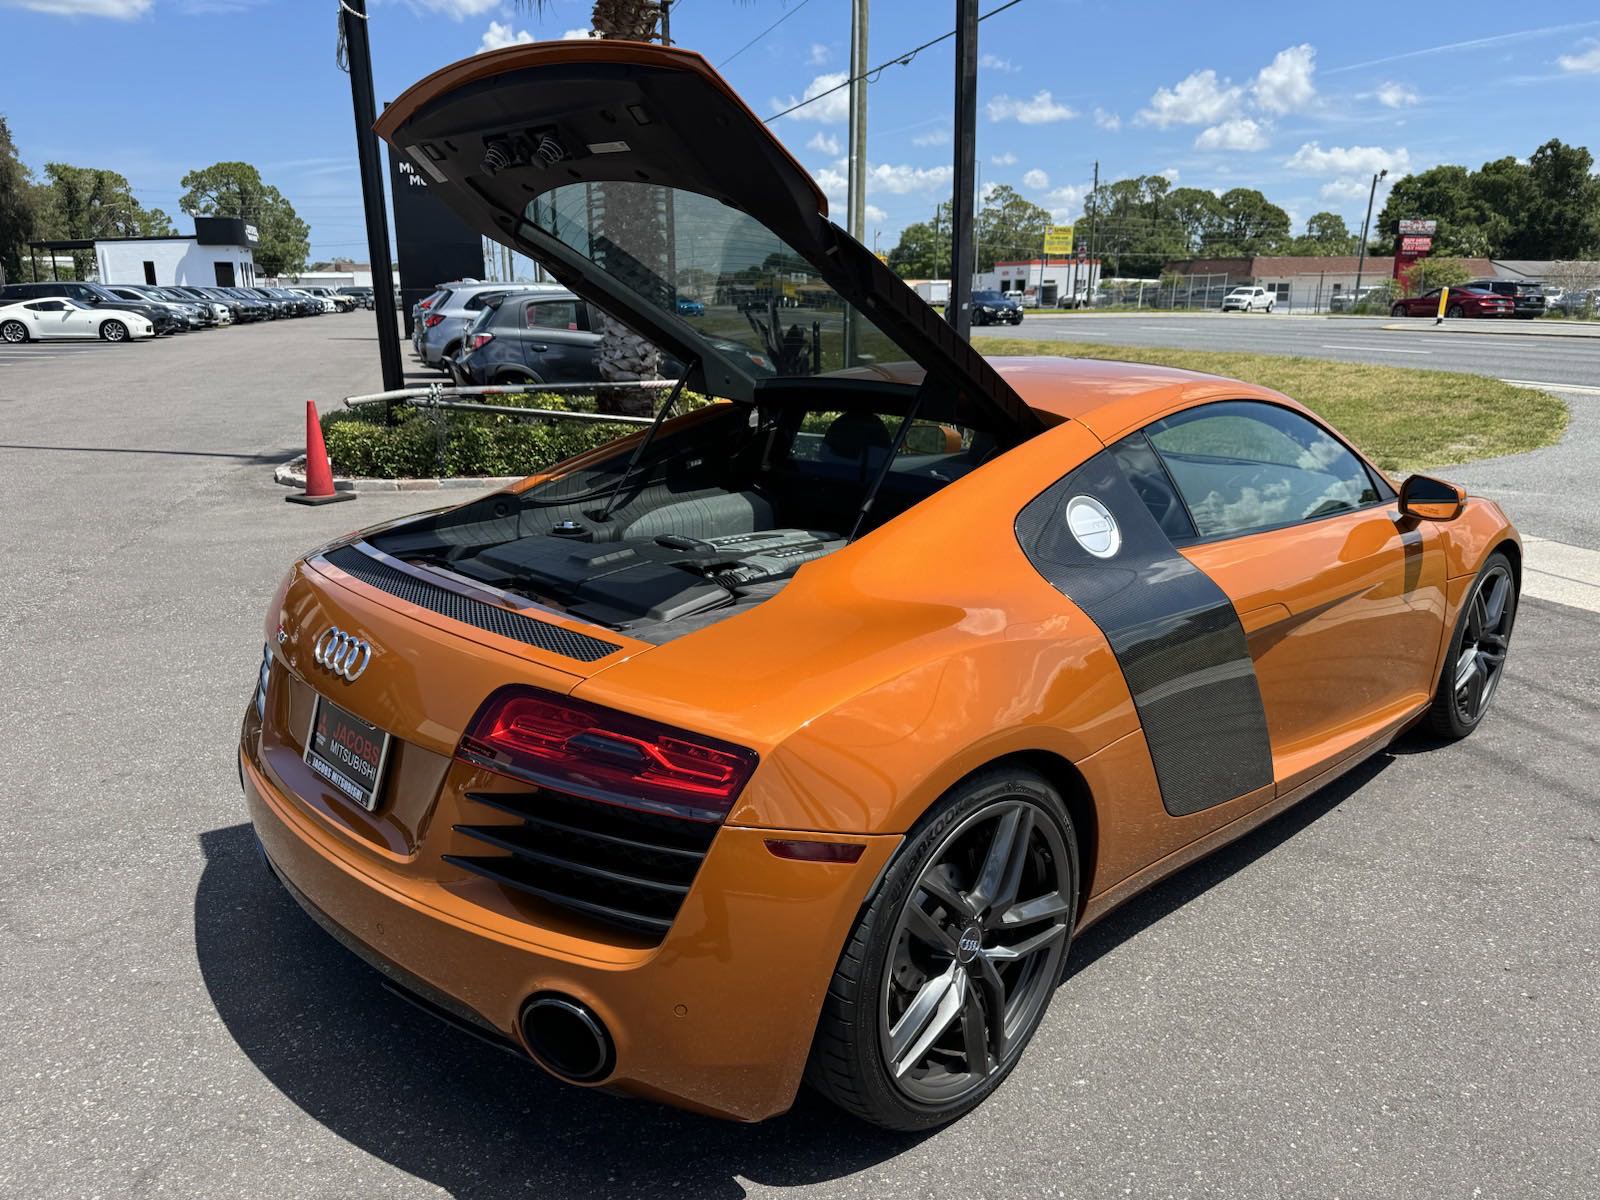 Used 2014 Audi R8 For Sale at JACOBS MITSUBISHI | VIN 